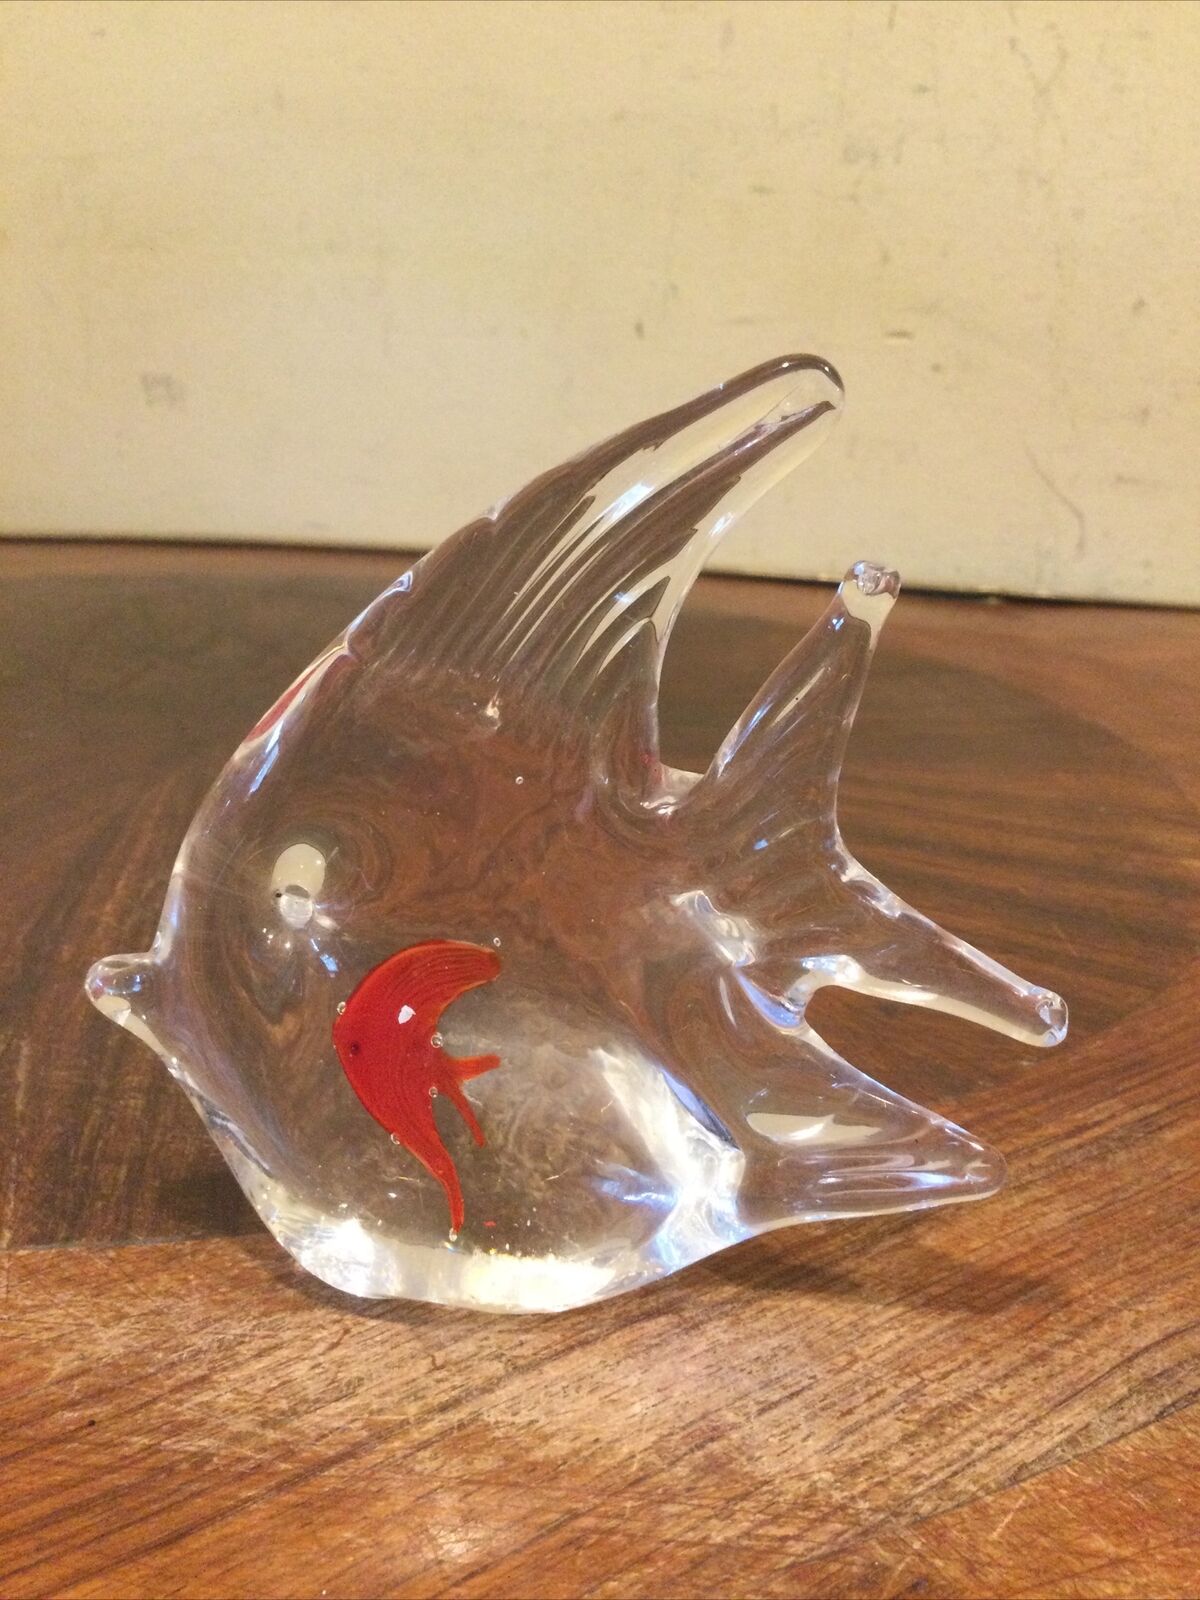 CLEAR GLASS FISH SHAPED FIGURINE PAPERWEIGHT RED FISH INSIDE 4” x 4” 